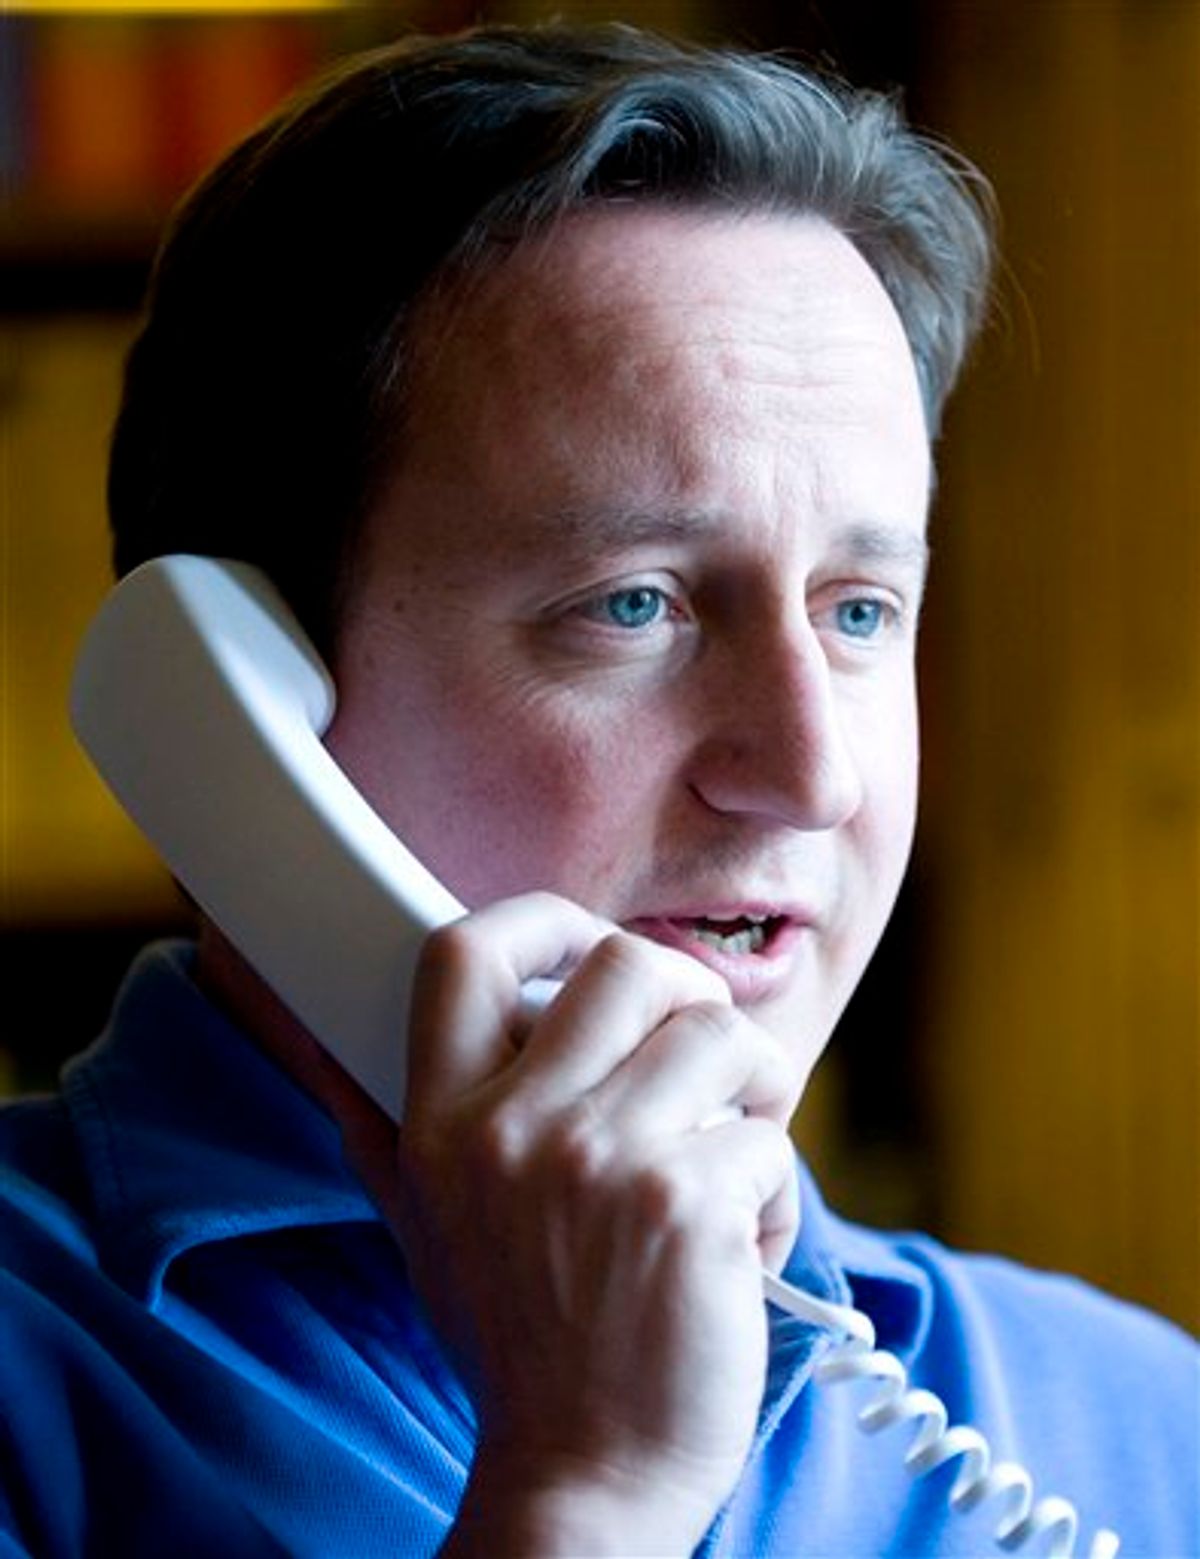 British Prime Minister David Cameron talks to President Obama on the phone in his office at Chequers, England,  about the BP situation in the Gulf of Mexico, Saturday June 12, 2010. The leaking oil that has tainted the Gulf of Mexico is also threatening the political shores on both sides of the Atlantic, with a British company the villain.  (AP Photo / Andrew Parsons , PA ) ** UNITED KINGDOM OUT NO SALES NO ARCHIVE  ** (AP)